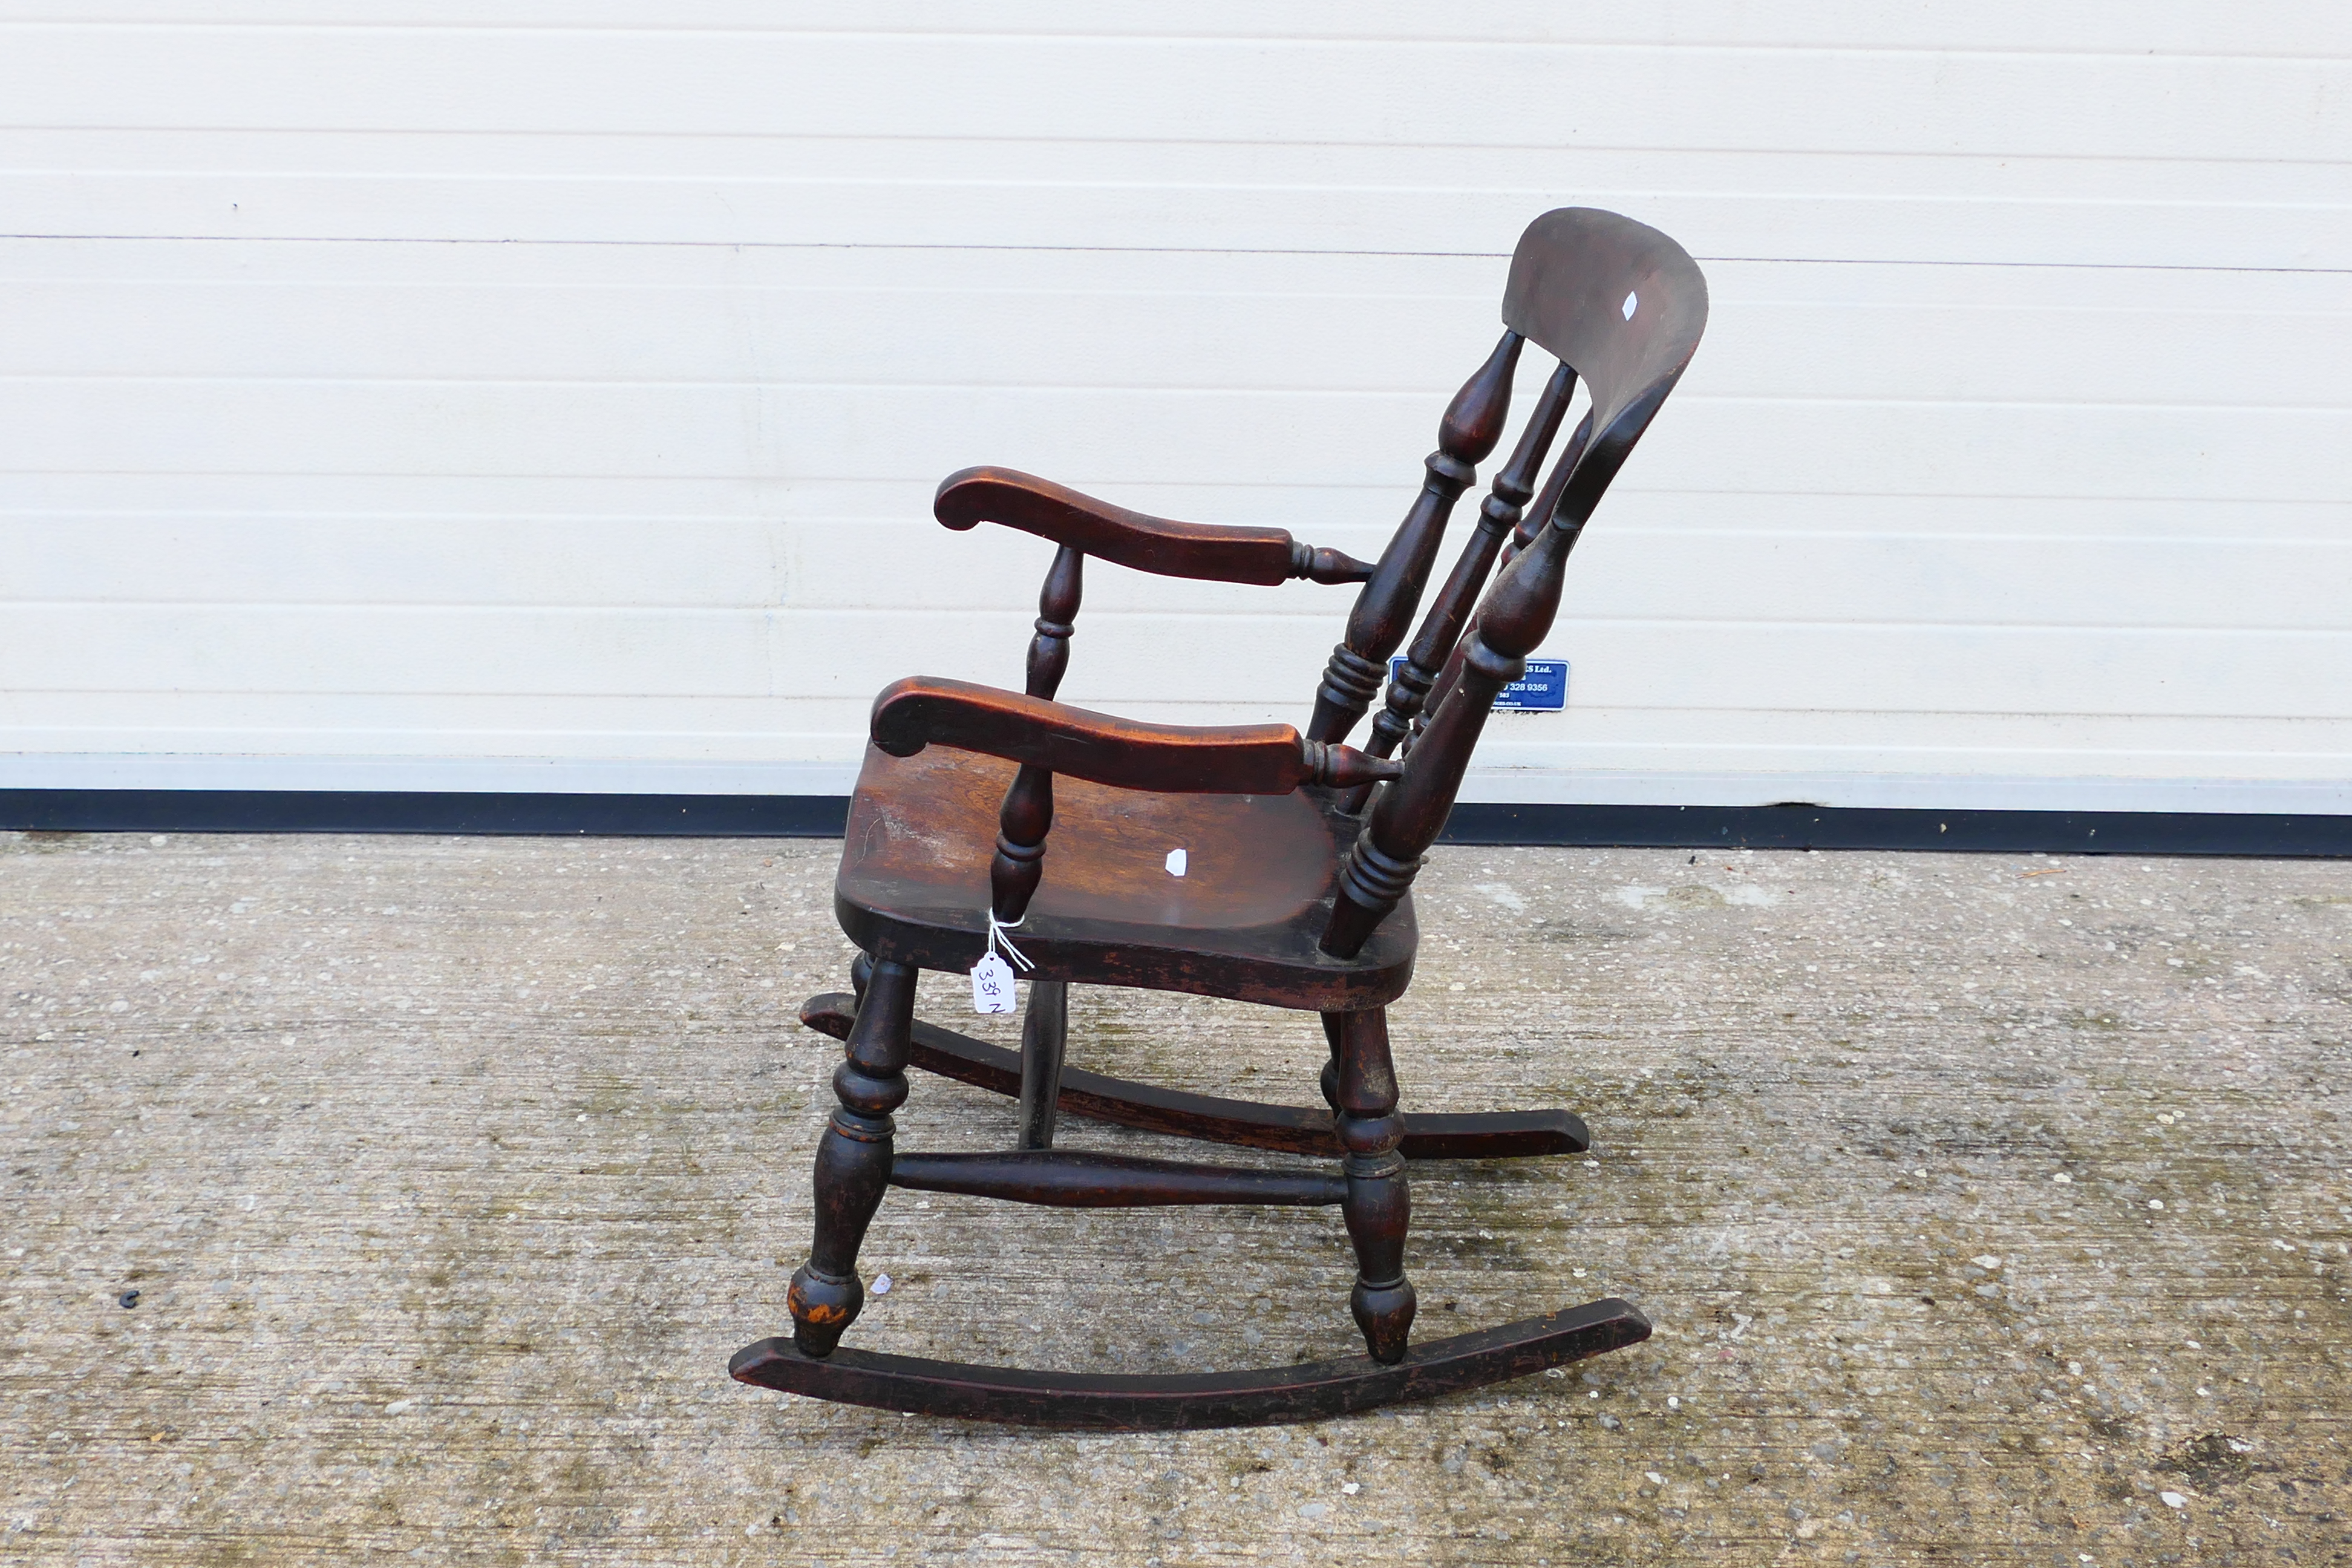 Child's Rocking Chair. A wooden, children's rocking chair. - Image 3 of 3